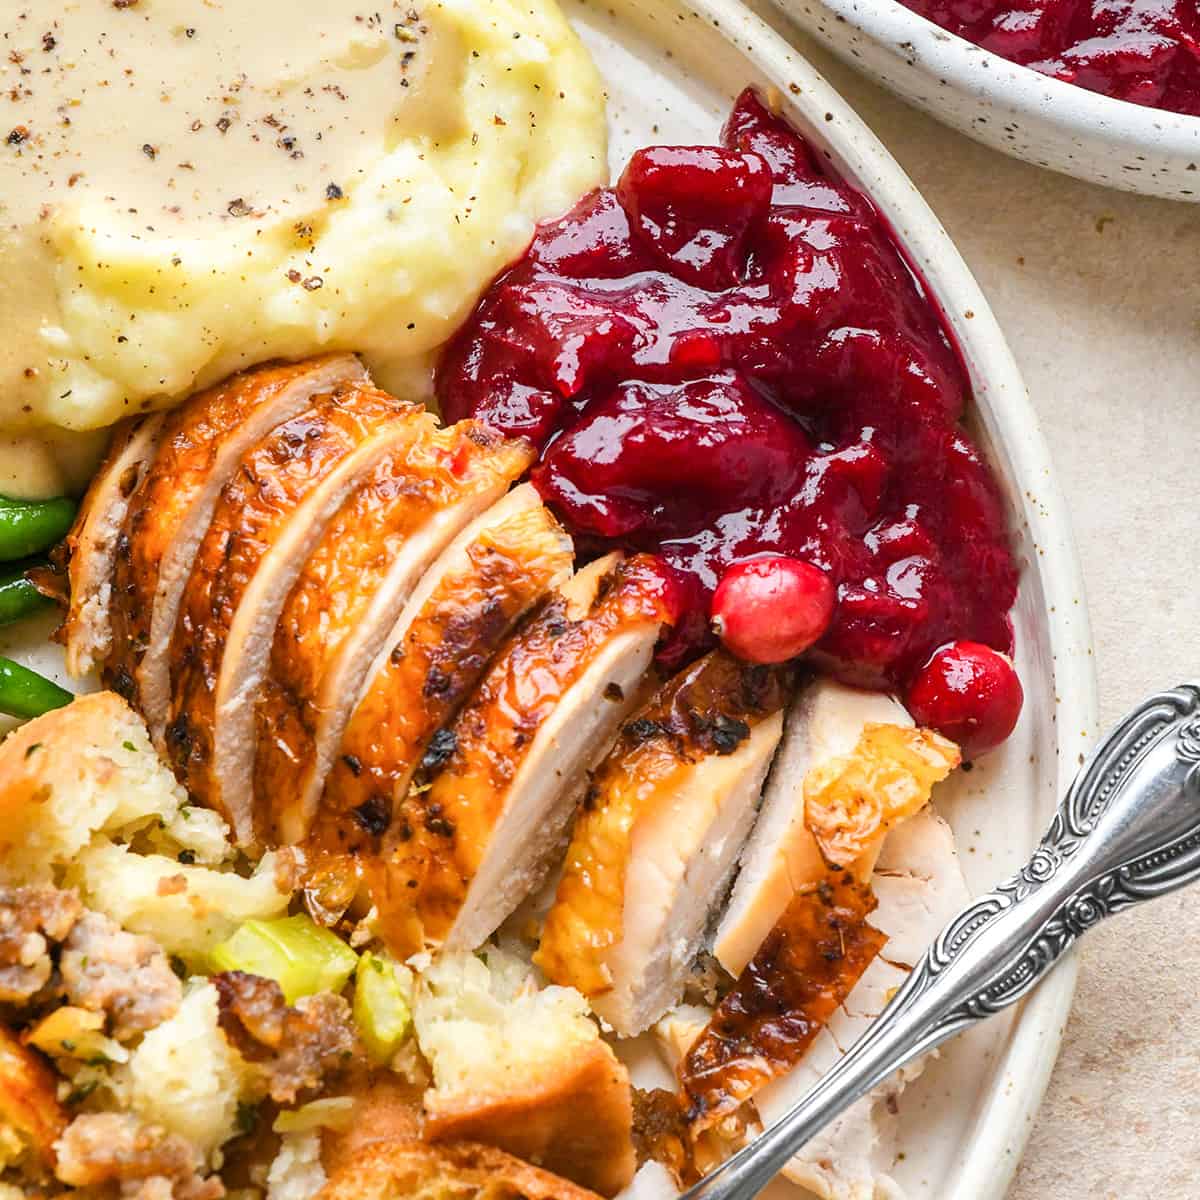 cranberry sauce on a plate with turkey, mashed potatoes, green beans and stuffing